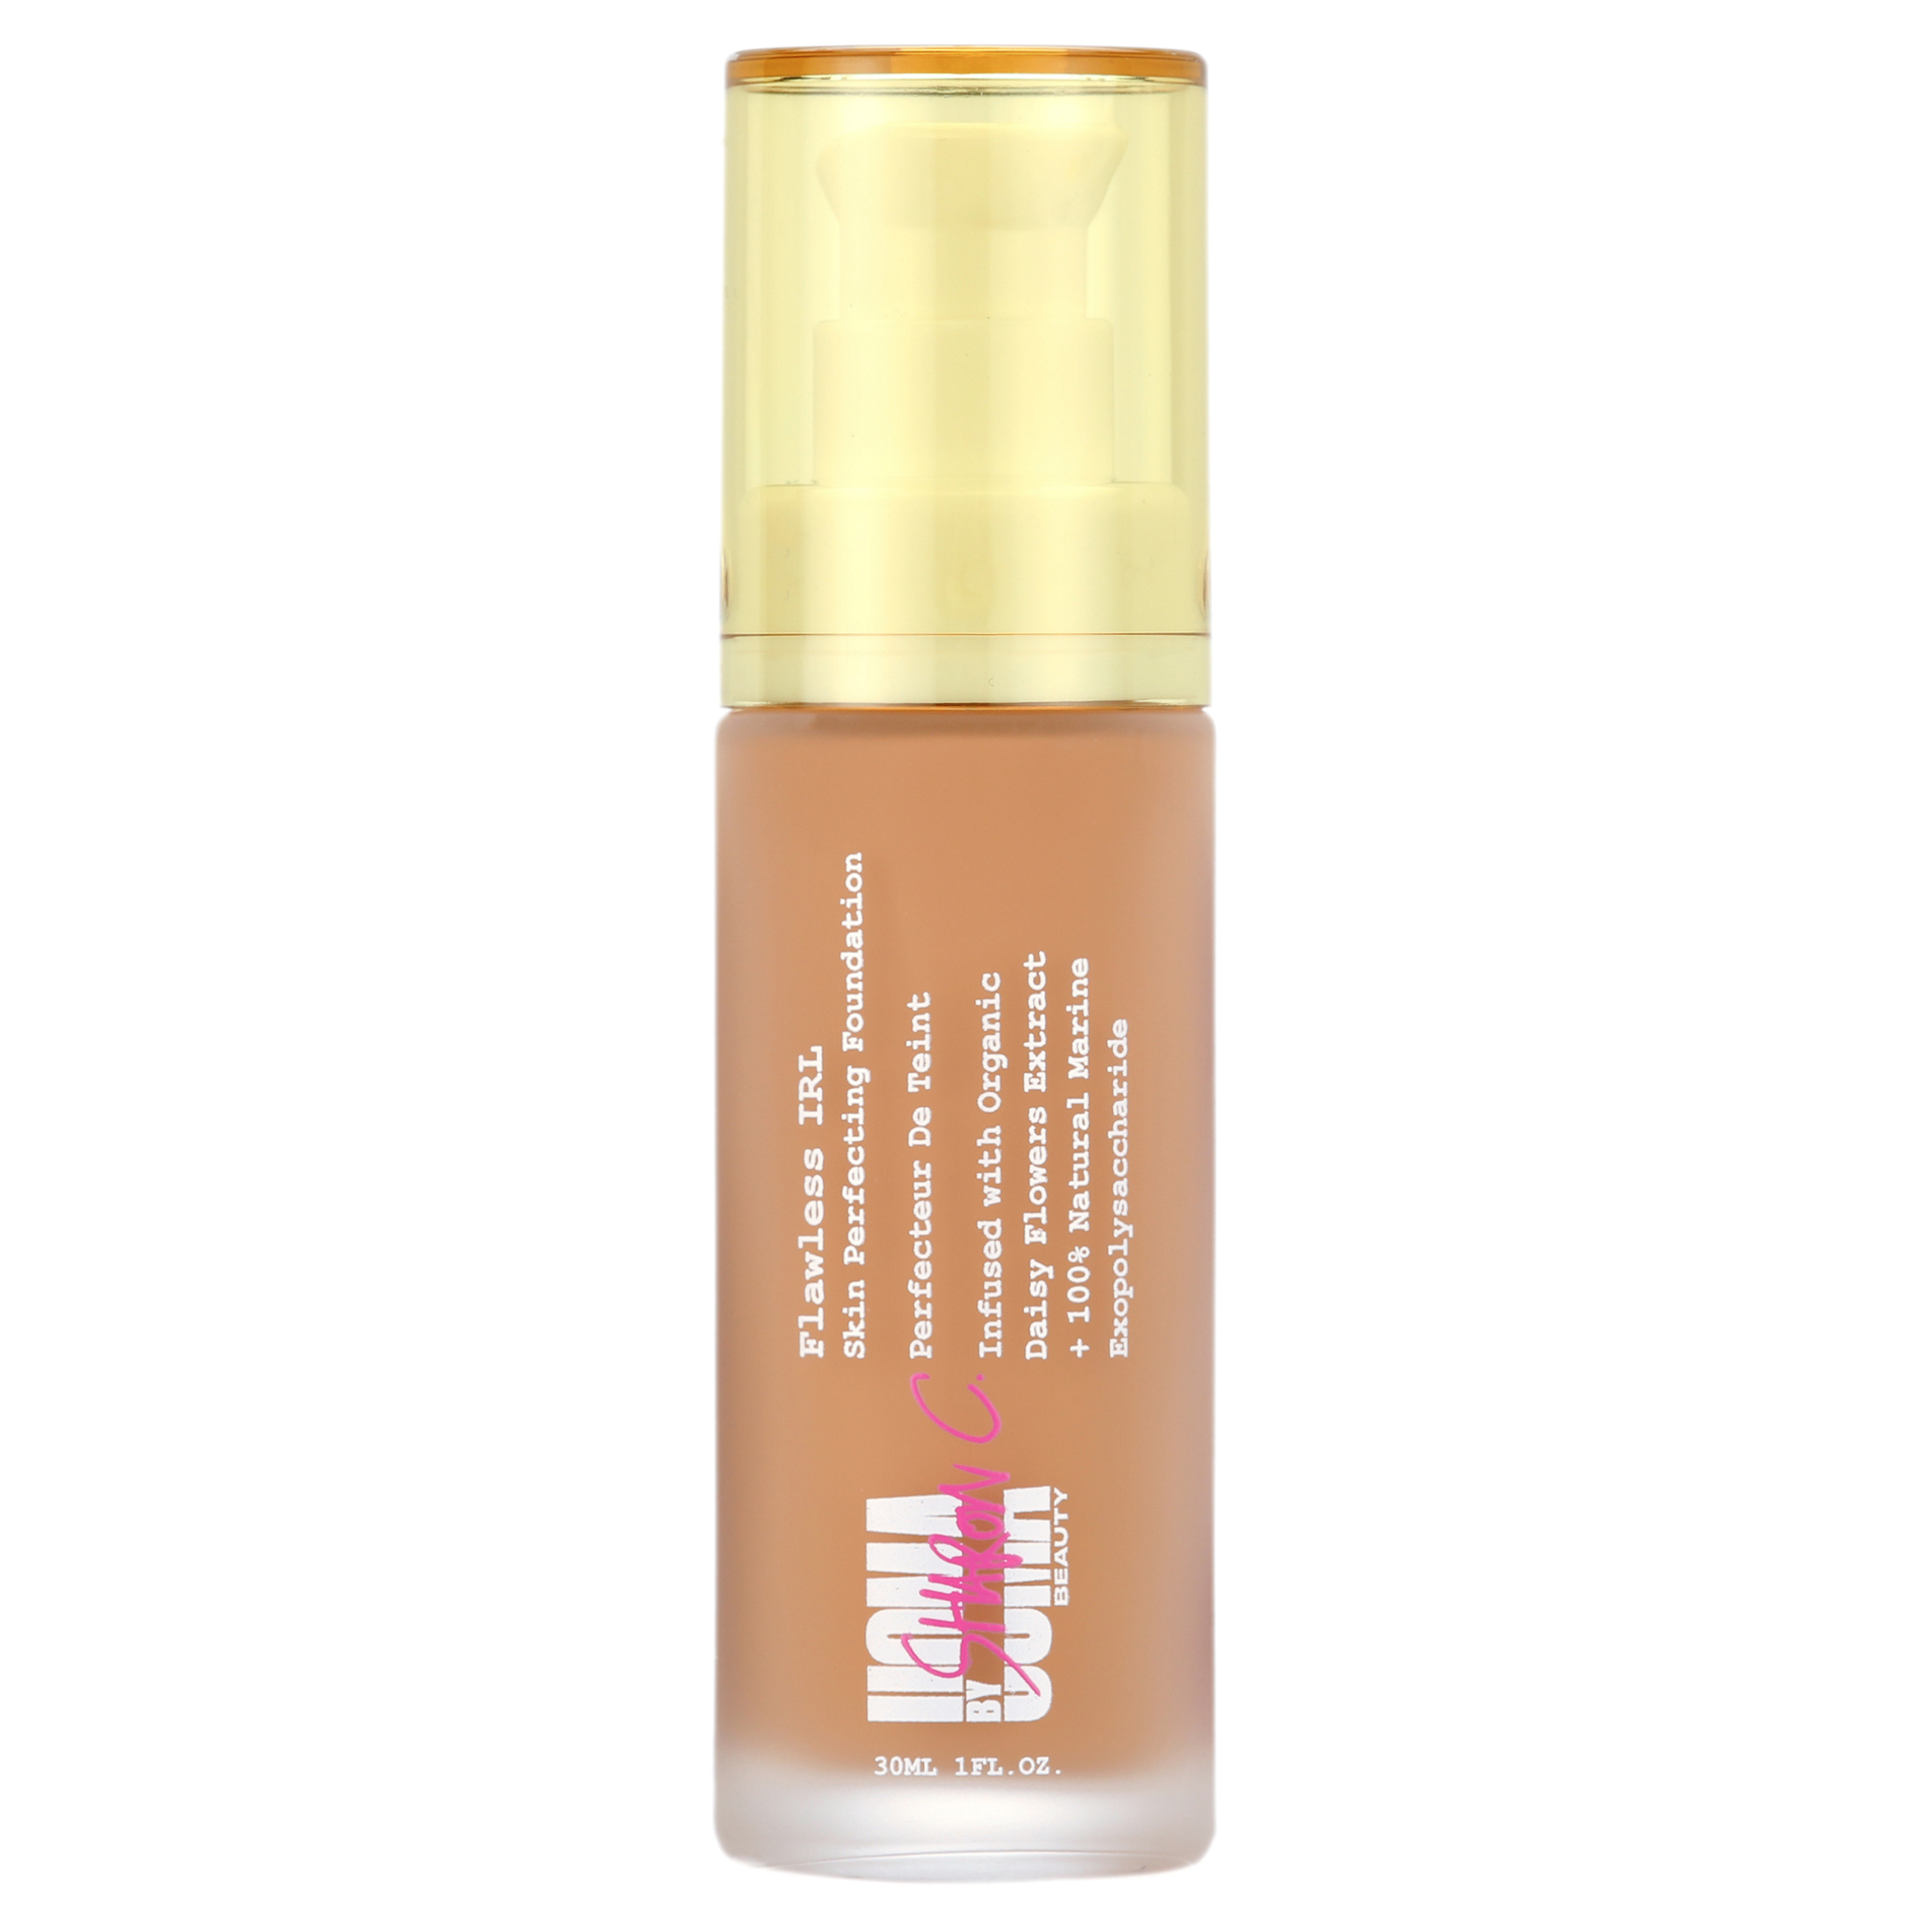 Uoma by Sharon C, Flawless IRL Skin Perfecting Foundation Bronze Venus T4 - image 1 of 8